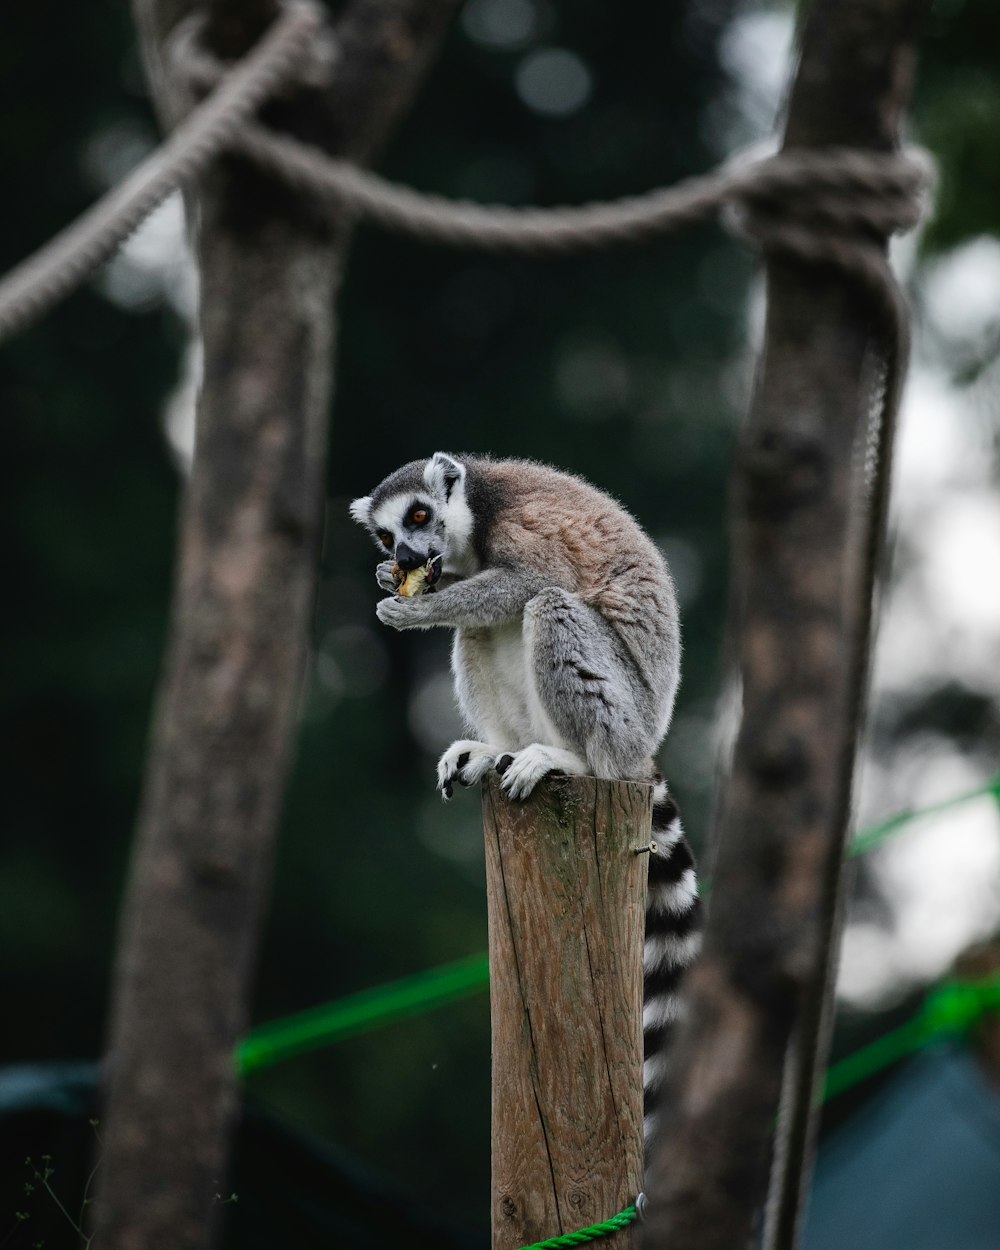 lemur eating and sitting on wooden post